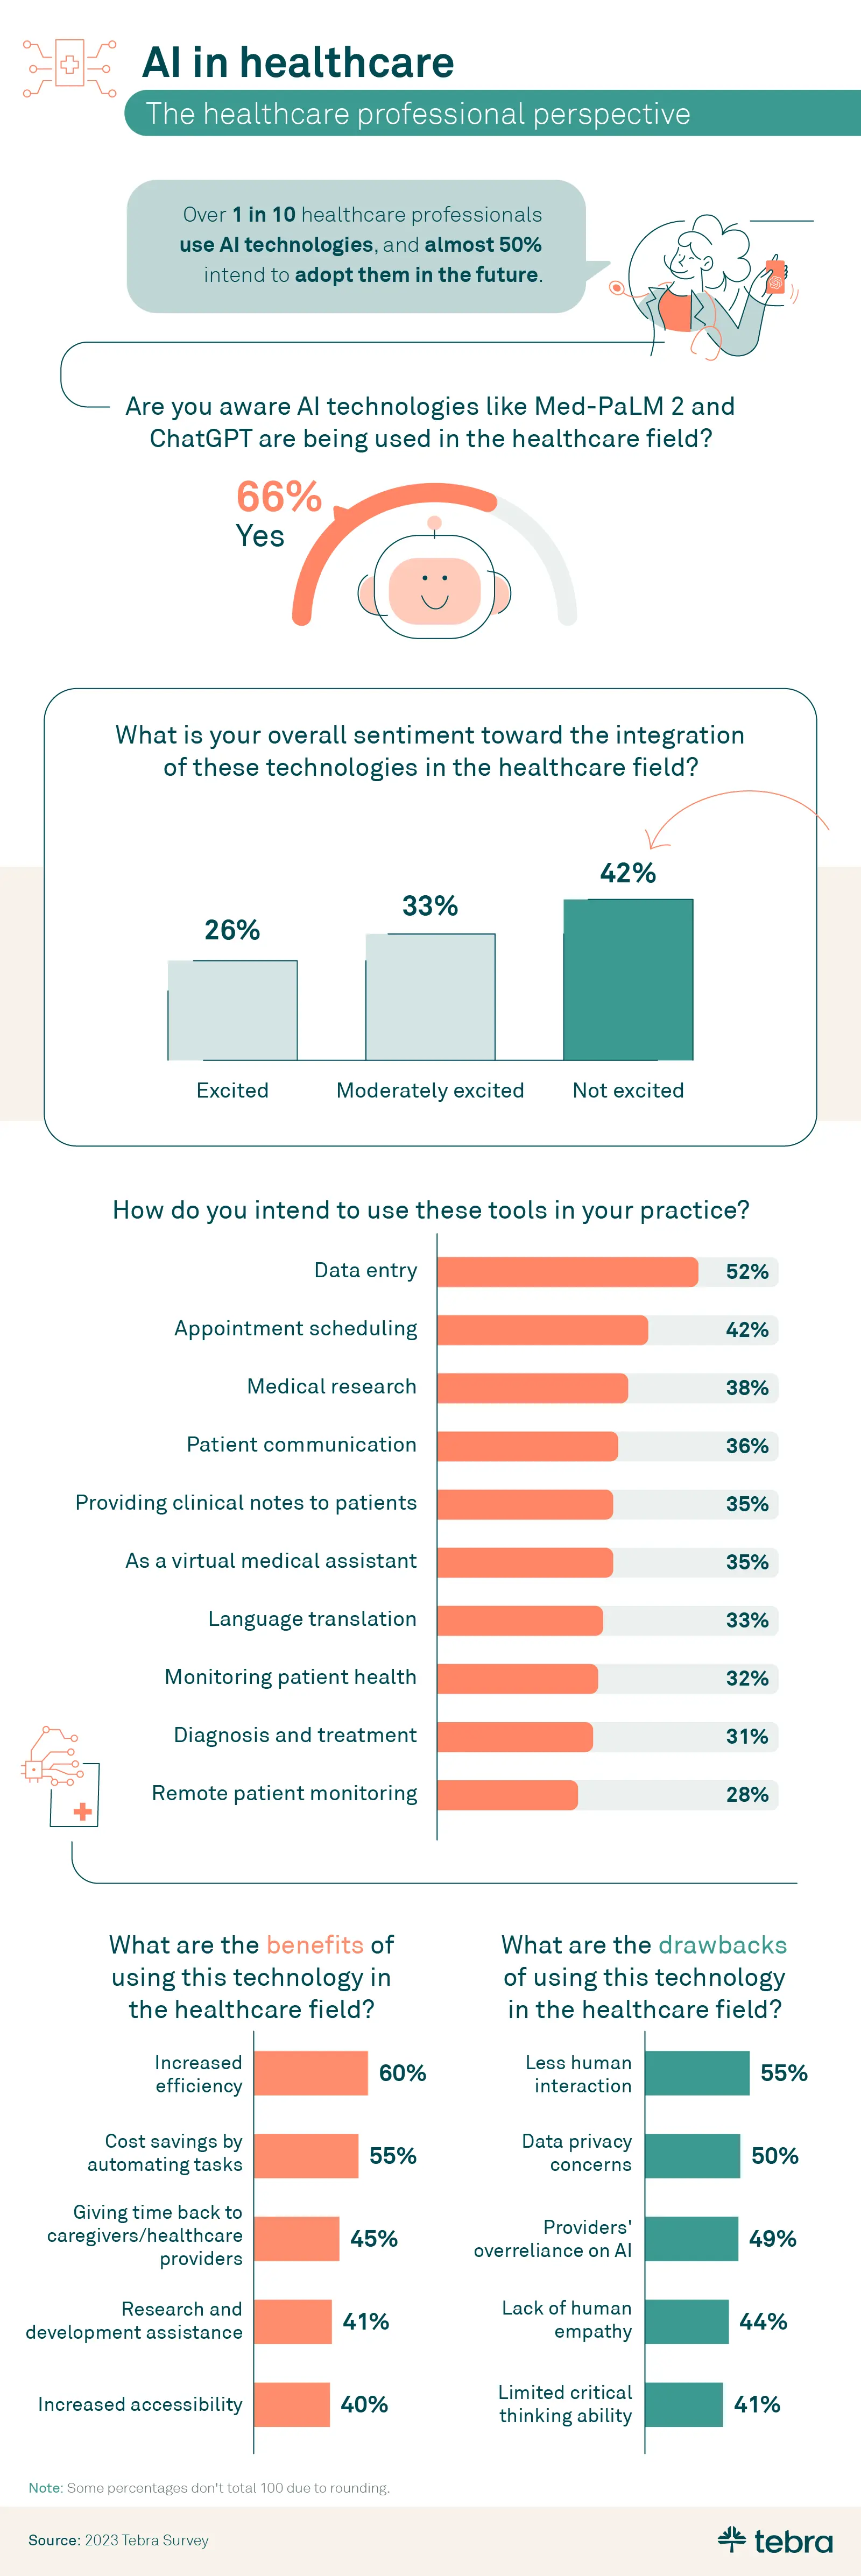 In this infographic titled “AI in healthcare: The healthcare professional perspective,” Over 1 in 10 healthcare professionals use AI technologies, and almost 50% have expressed an intent to adopt these technologies in the future. 66% of respondents said they already know how the medical field could utilize tools like Med-PaLM 2 and ChatGPT. 42% of healthcare professionals do not feel enthusiastic about the use of AI technologies in the healthcare industry. Nearly half of the health professionals we surveyed said they plan to use the technology in the future for things like data entry, appointment scheduling, and even medical research. Experts expect AI automation to improve efficiency, cut costs, and increase accessibility. However, skeptics worry it may limit human interaction, compromise data privacy, and lead to an overreliance on AI among healthcare providers